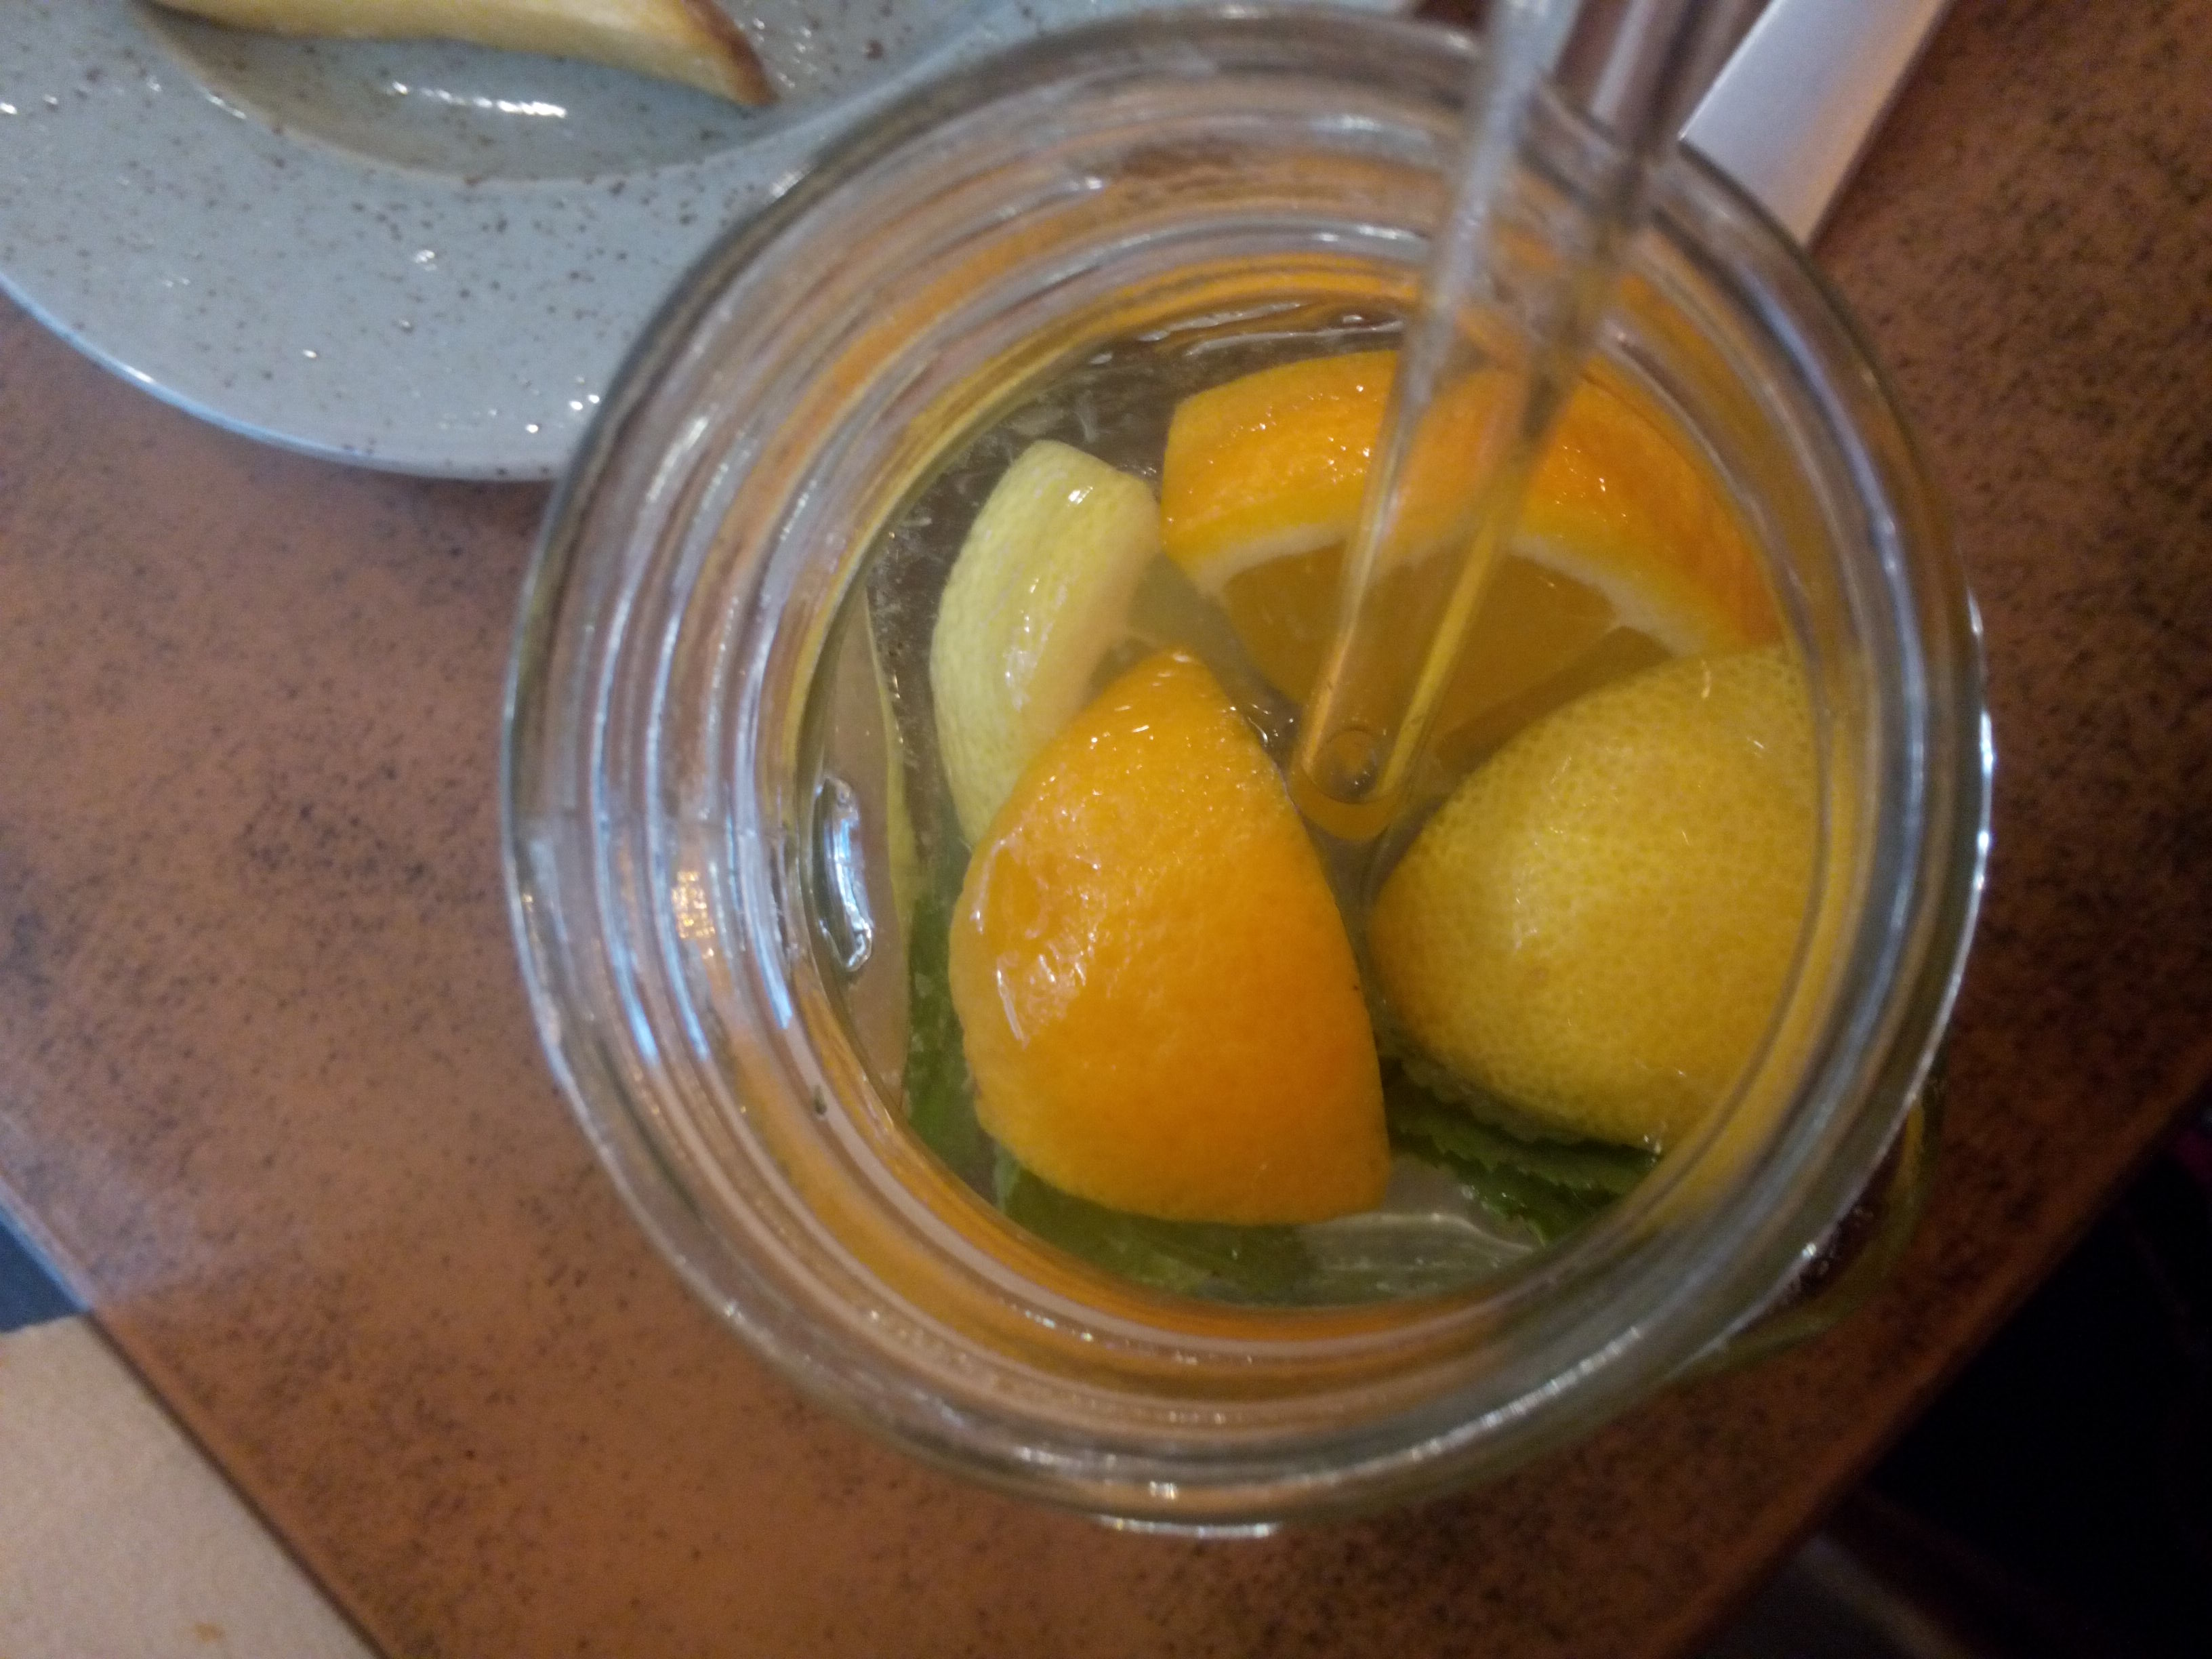 From above, a glass with a glass straw, and pieces of orange and lemon floating